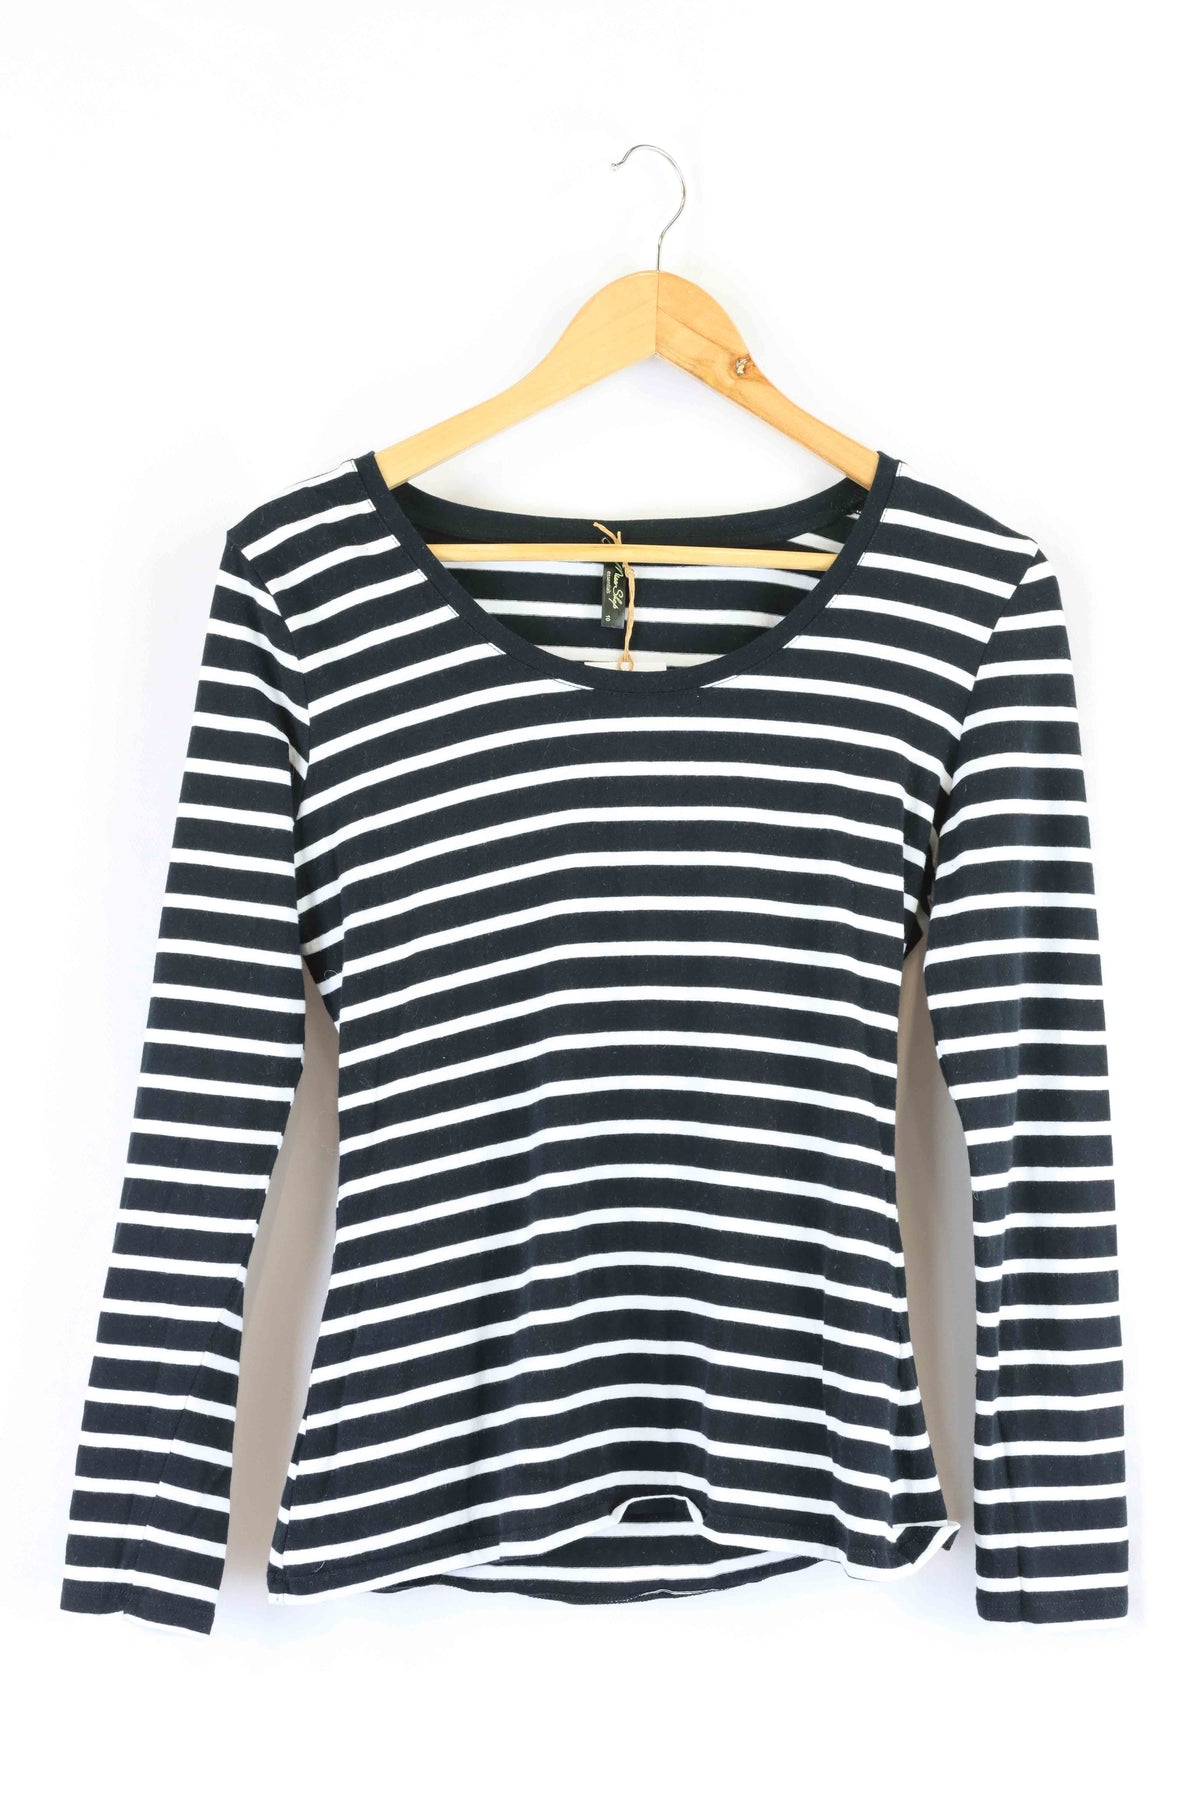 Miss Shop Black and White Stripe Long Sleeve Top 12